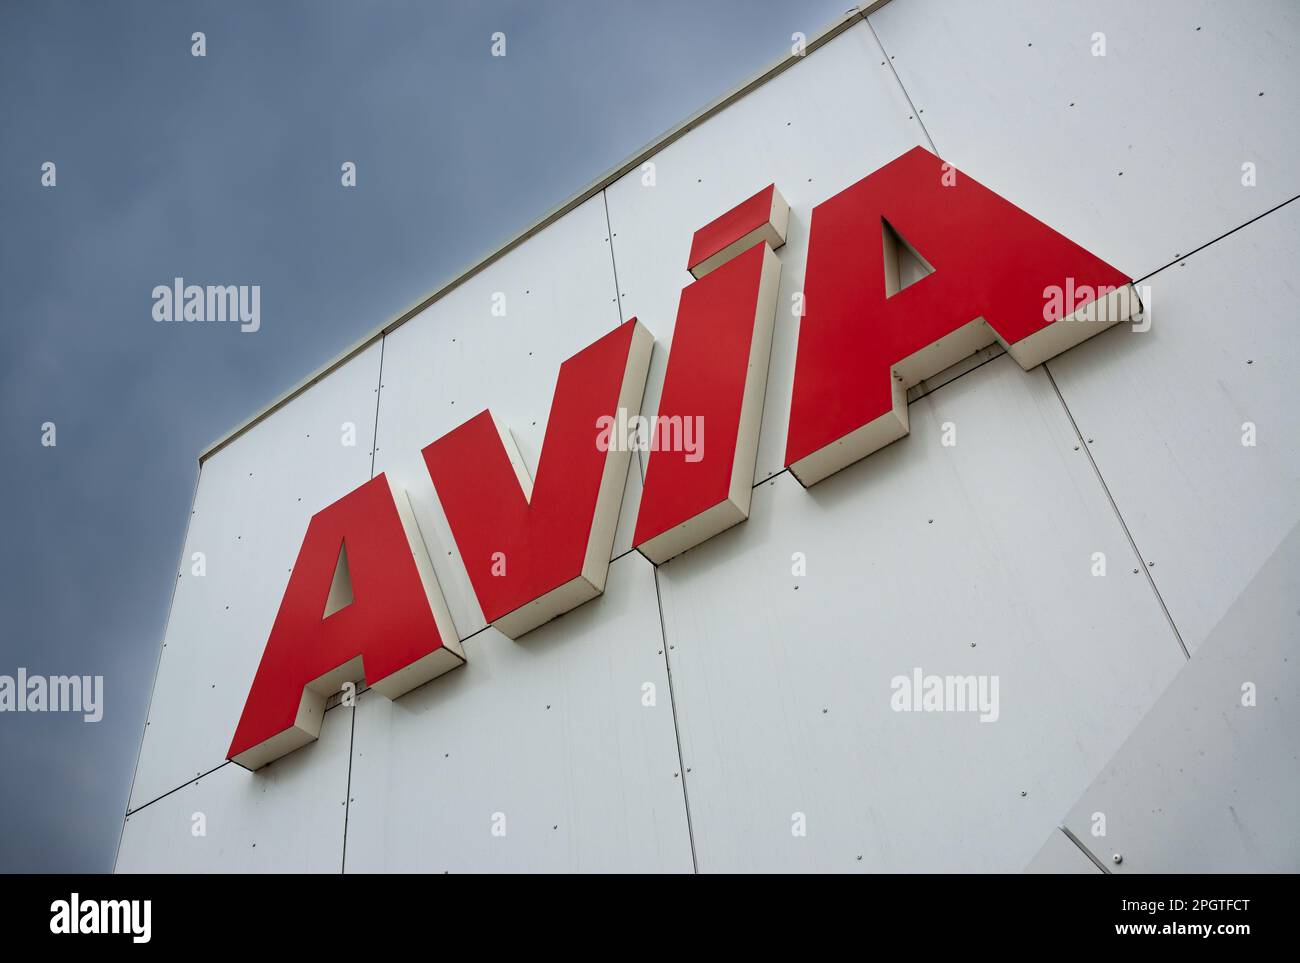 Romagnieu, France - March 2, 2023: Avia gas station trademark company logo at the service station Aire de Romagnieu Stock Photo